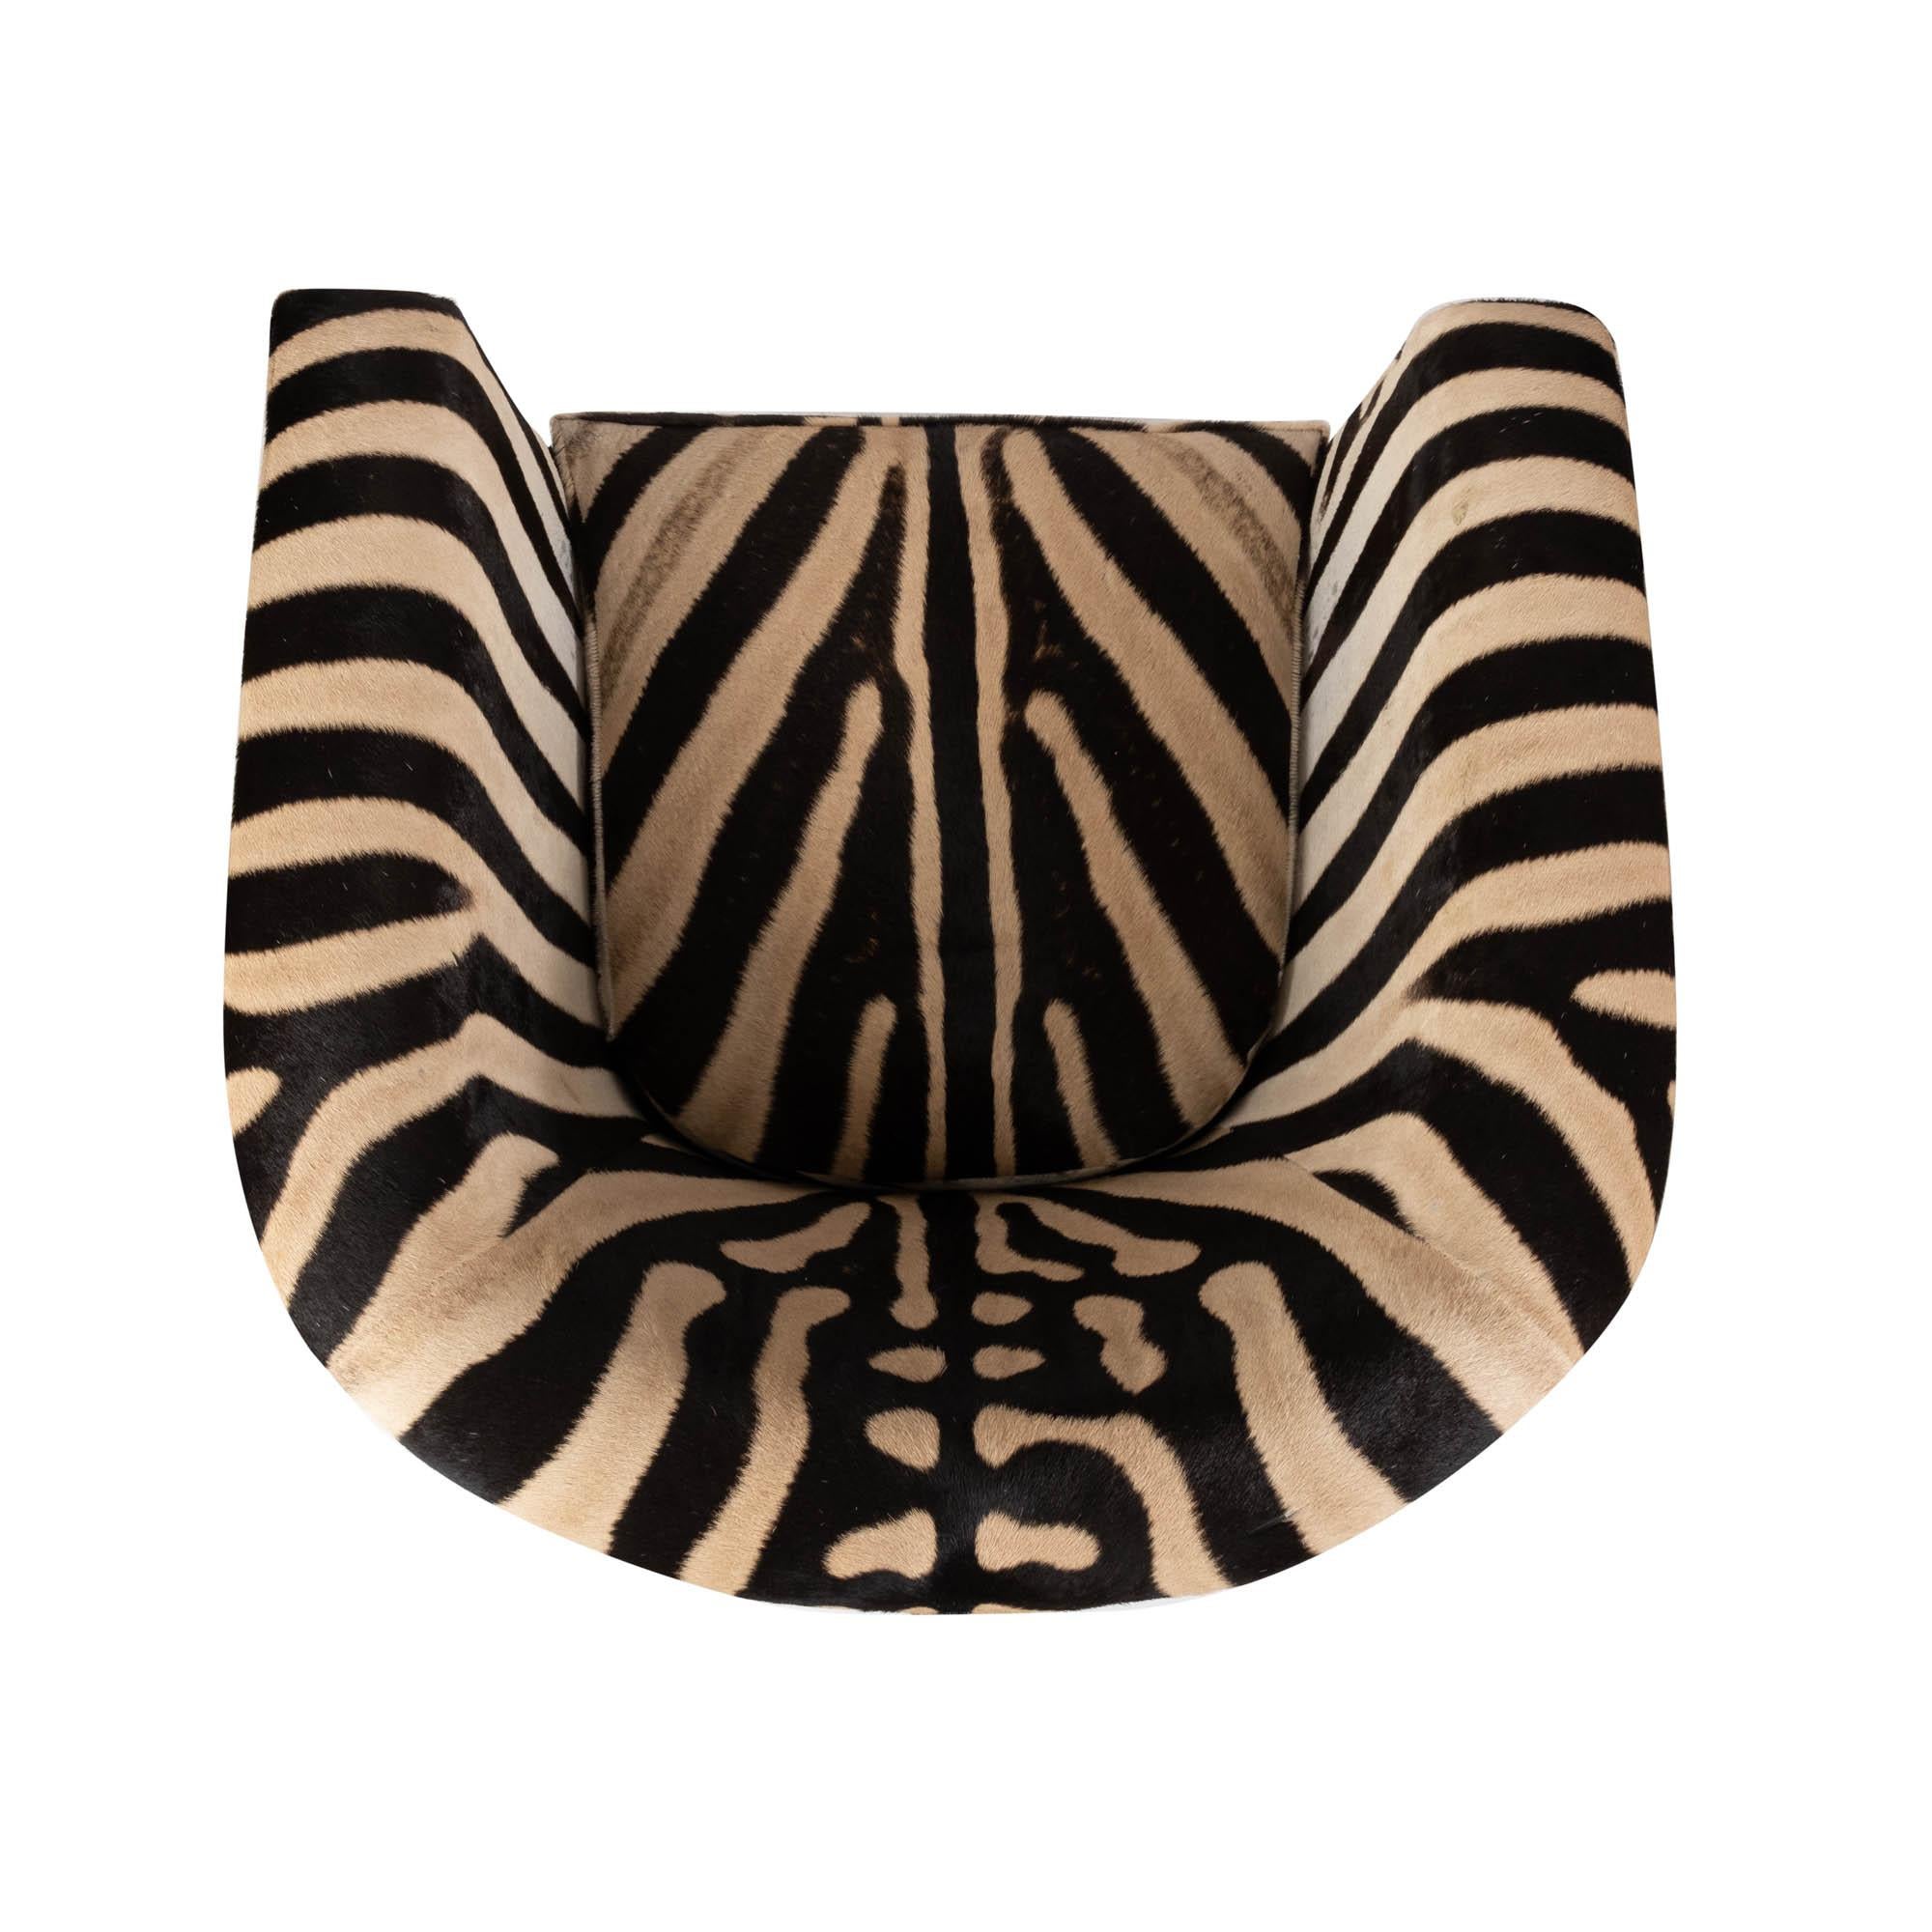 South African Tub Chair - Zebra Hide For Sale